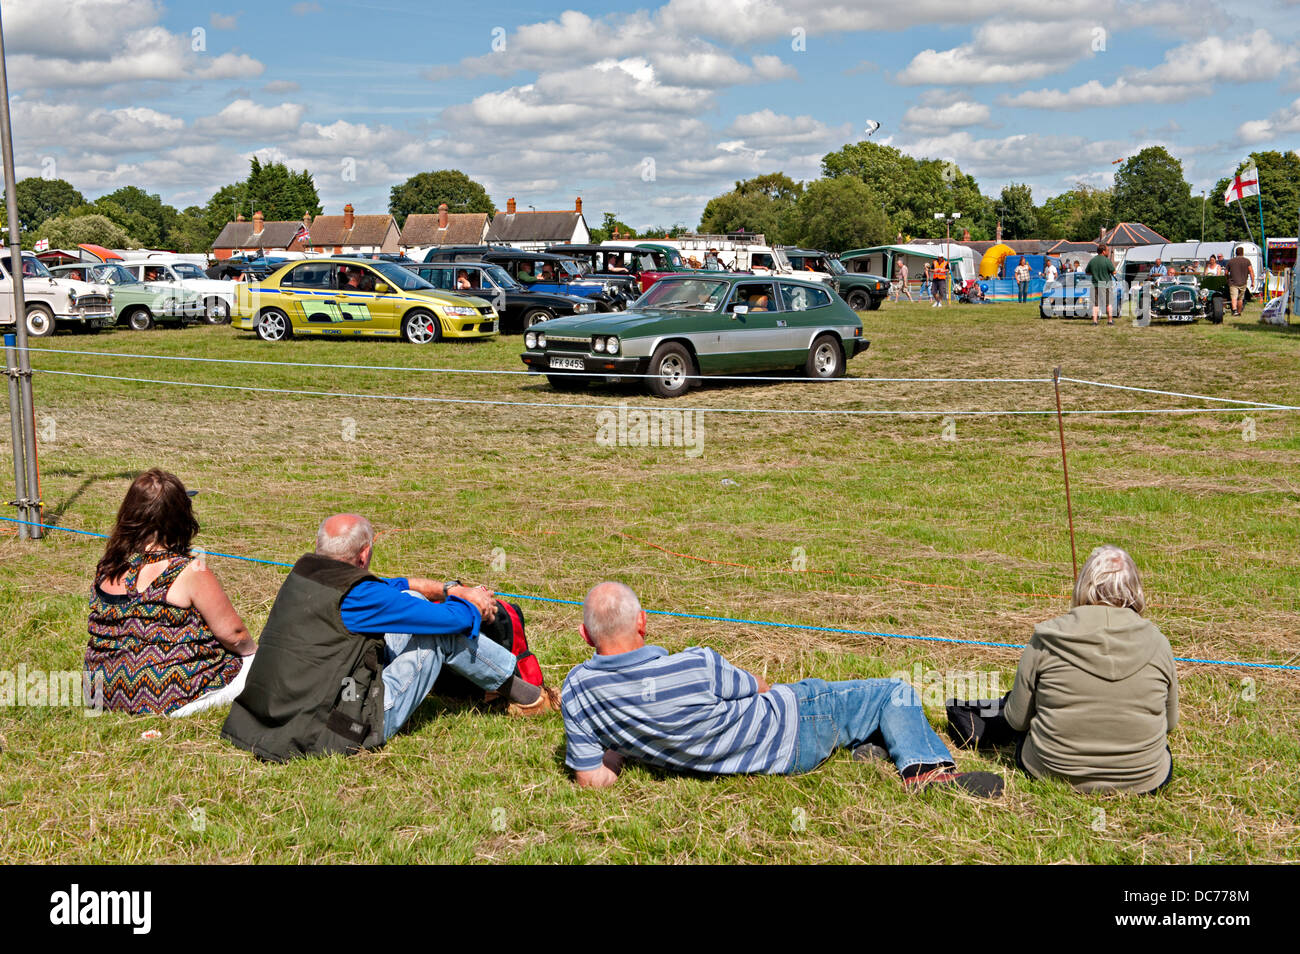 Spectators watch as old vehicles are displayed at a transport fair in Lingfield, Sussex, UK Stock Photo